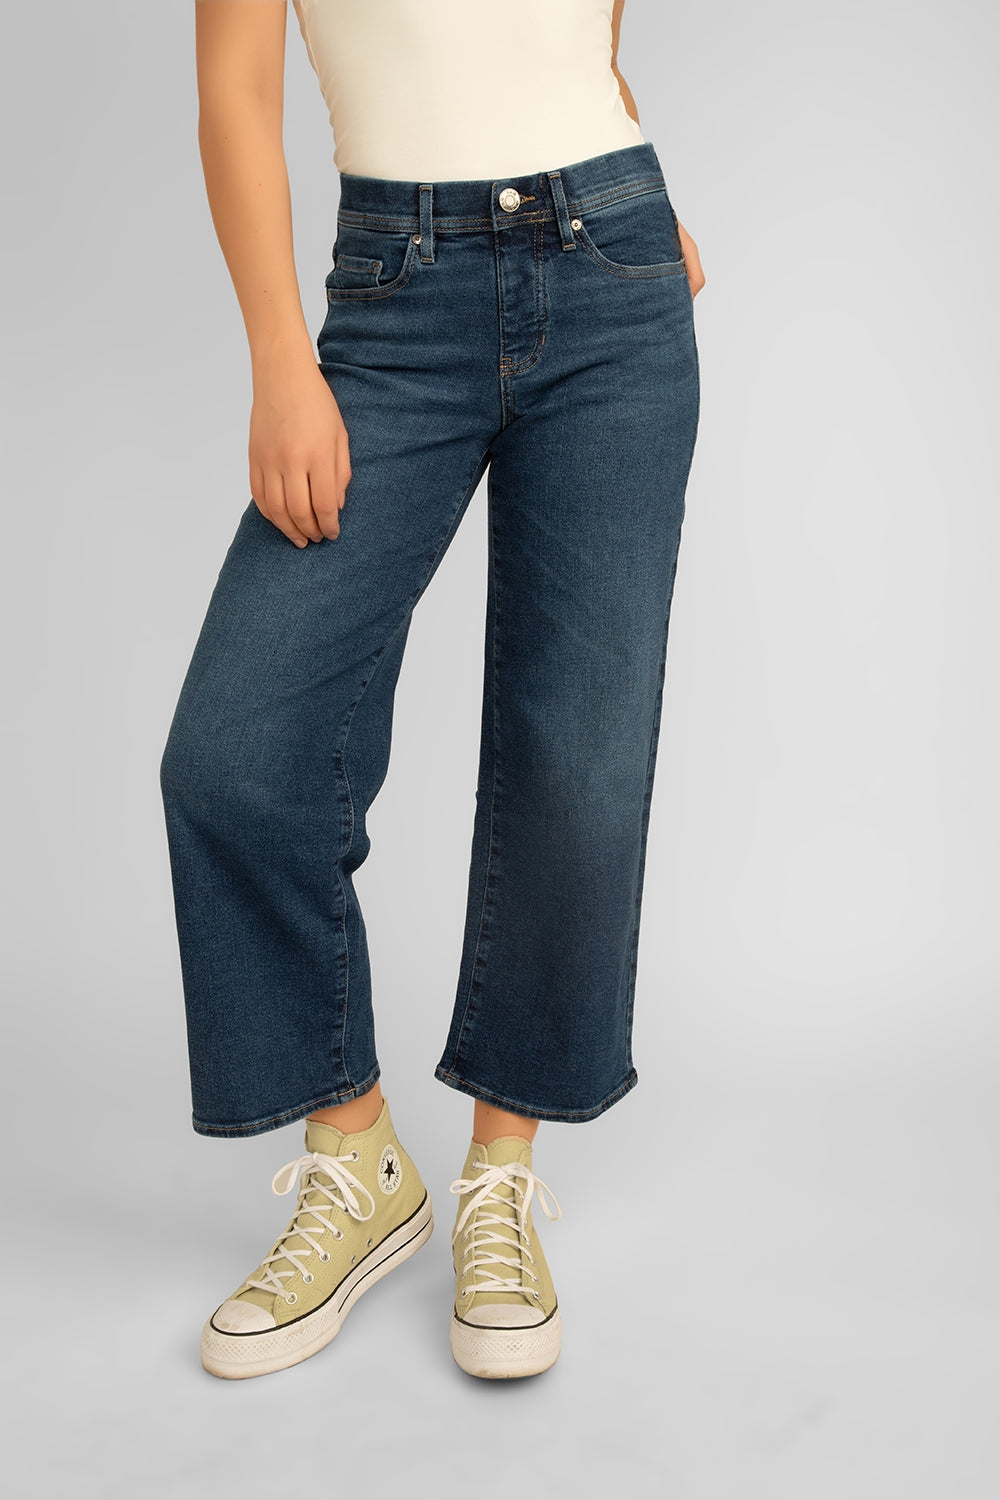 JAG - Jag Carter Mid Rise Girlfriend Jeans - Women's Clothing & Accessories 